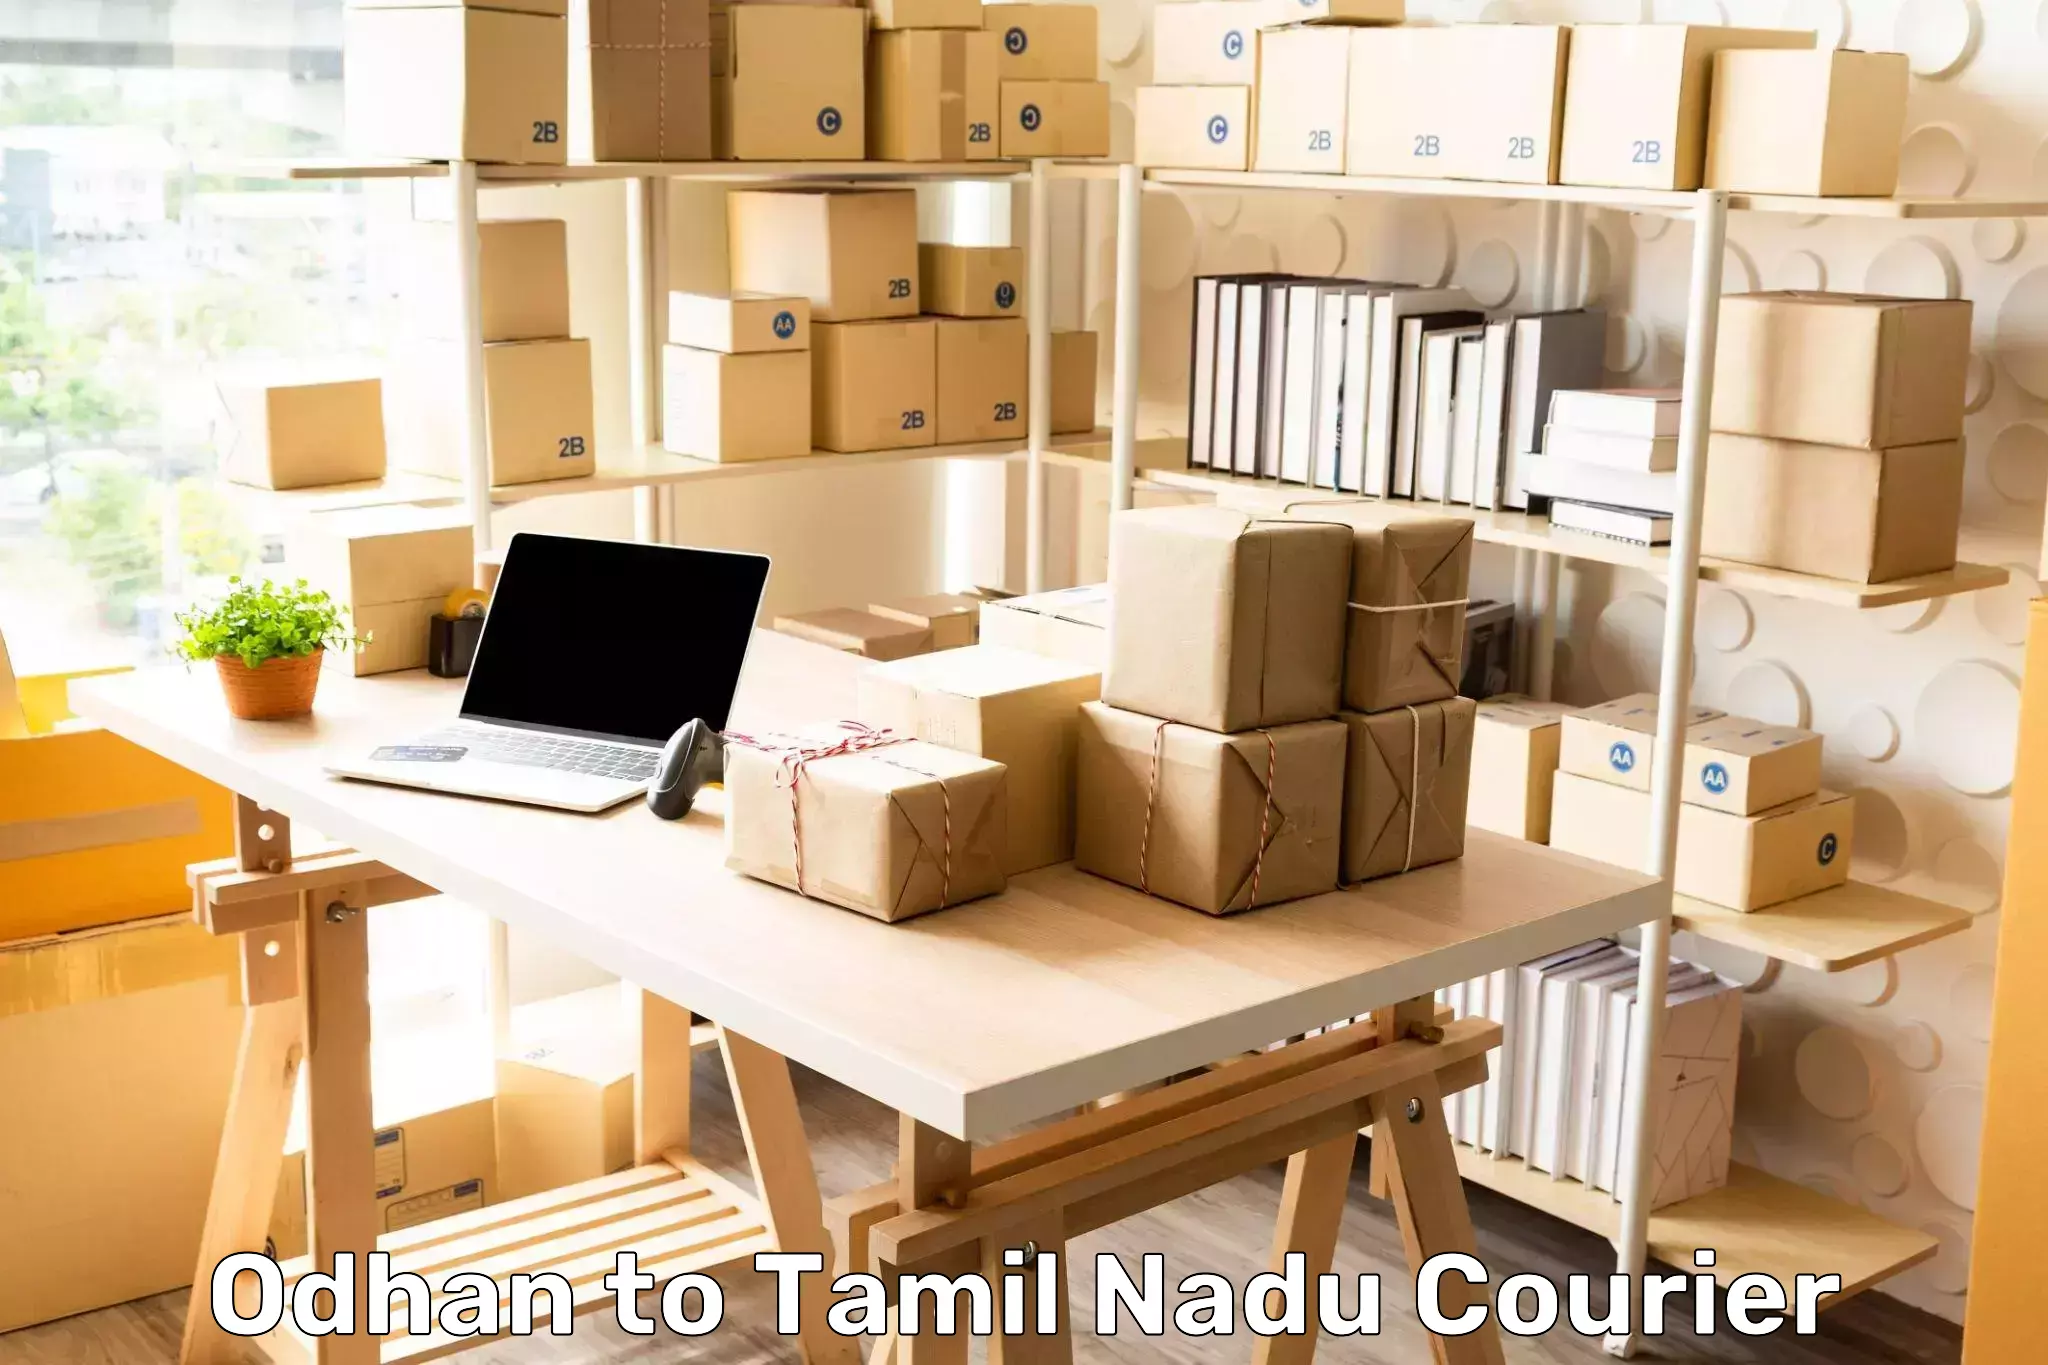 Express courier capabilities Odhan to Tamil Nadu